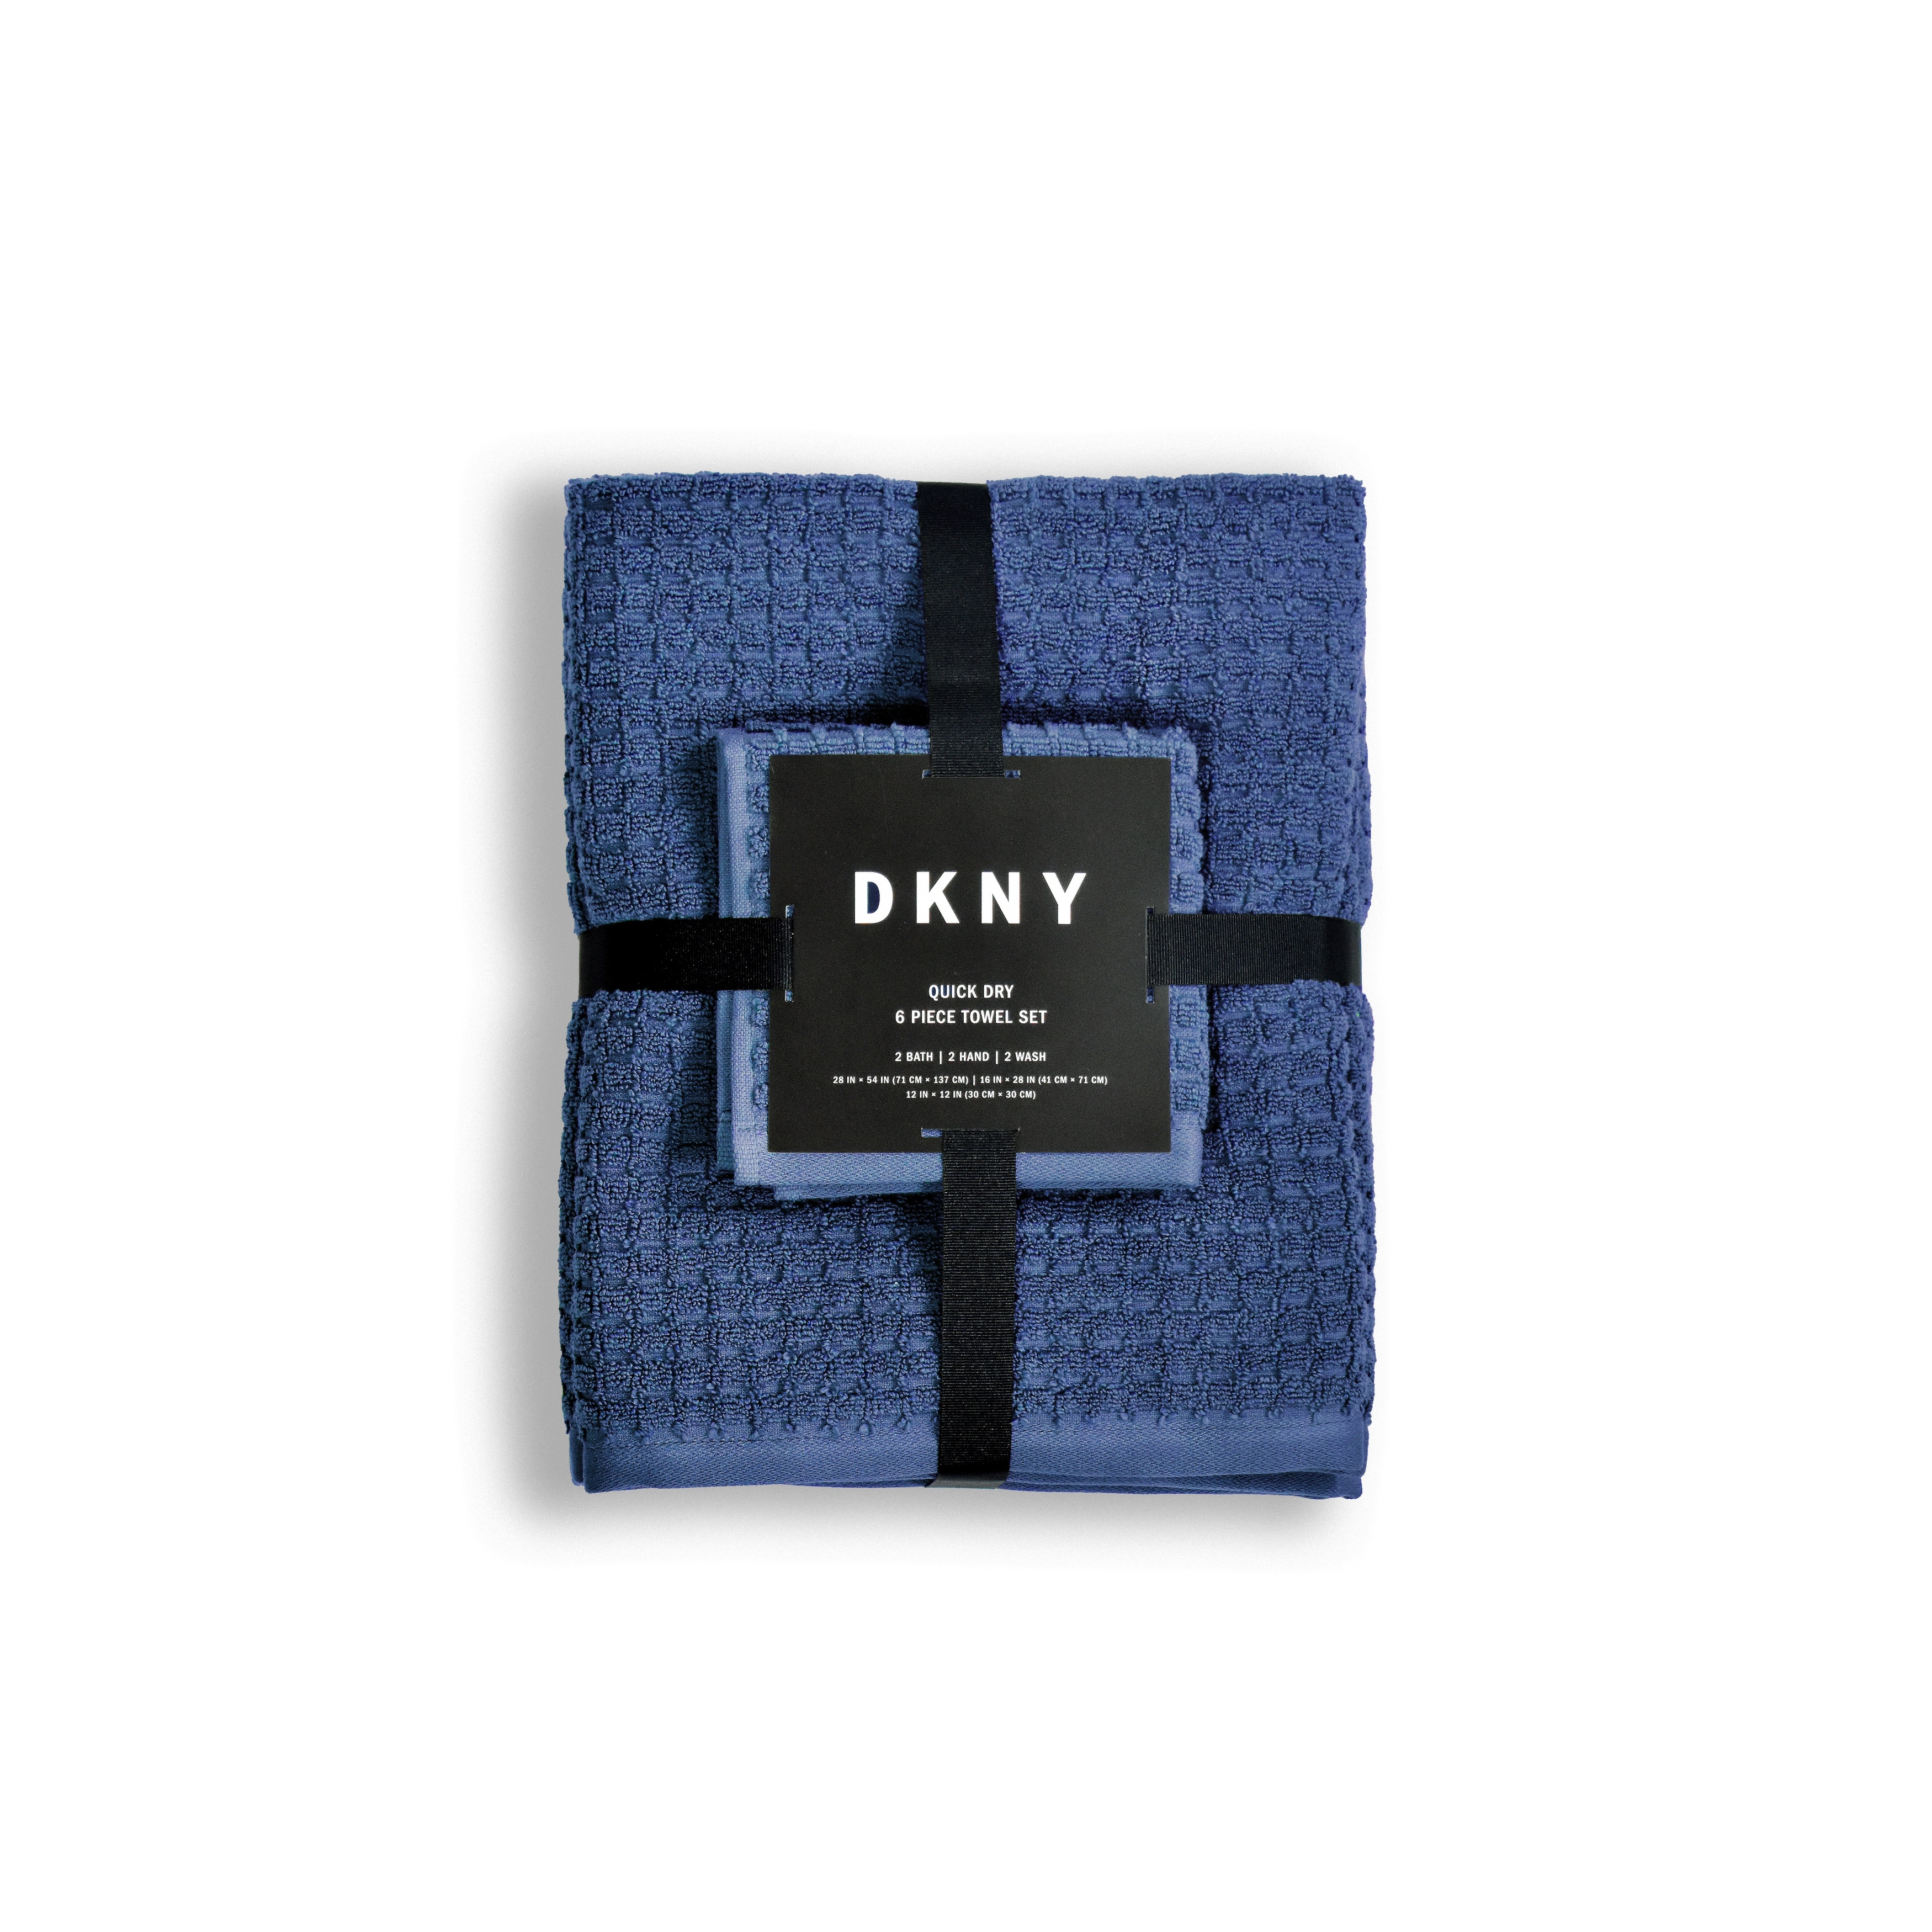 DKNY Quick Dry 100% Cotton Towels, 6 Pack Washcloths - 12 x12, Grey